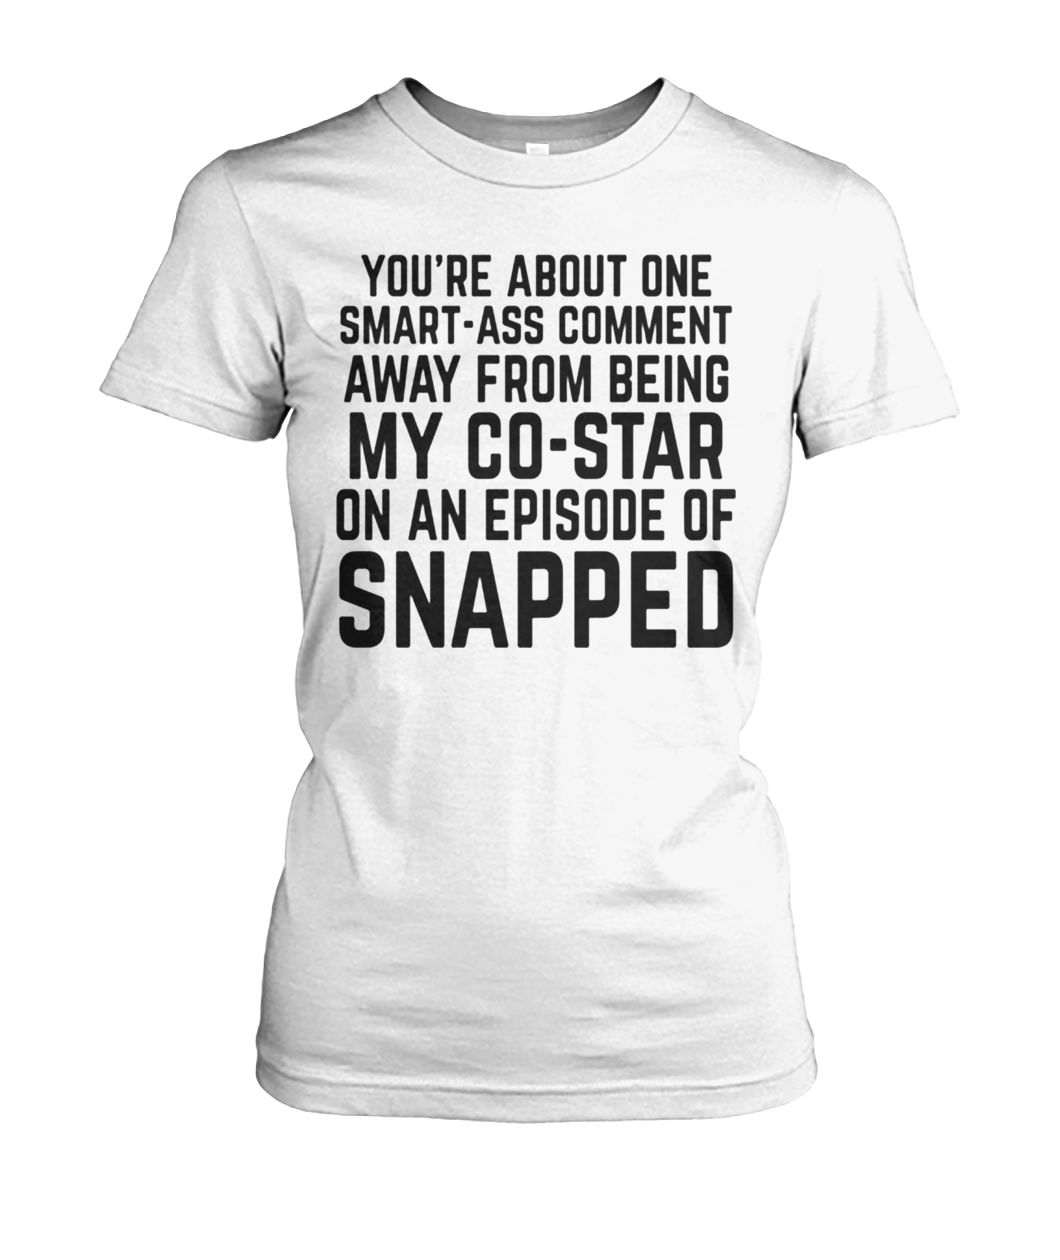 You're about one smart-ass comment away from being my co-star on an episode-of snapped women's crew tee